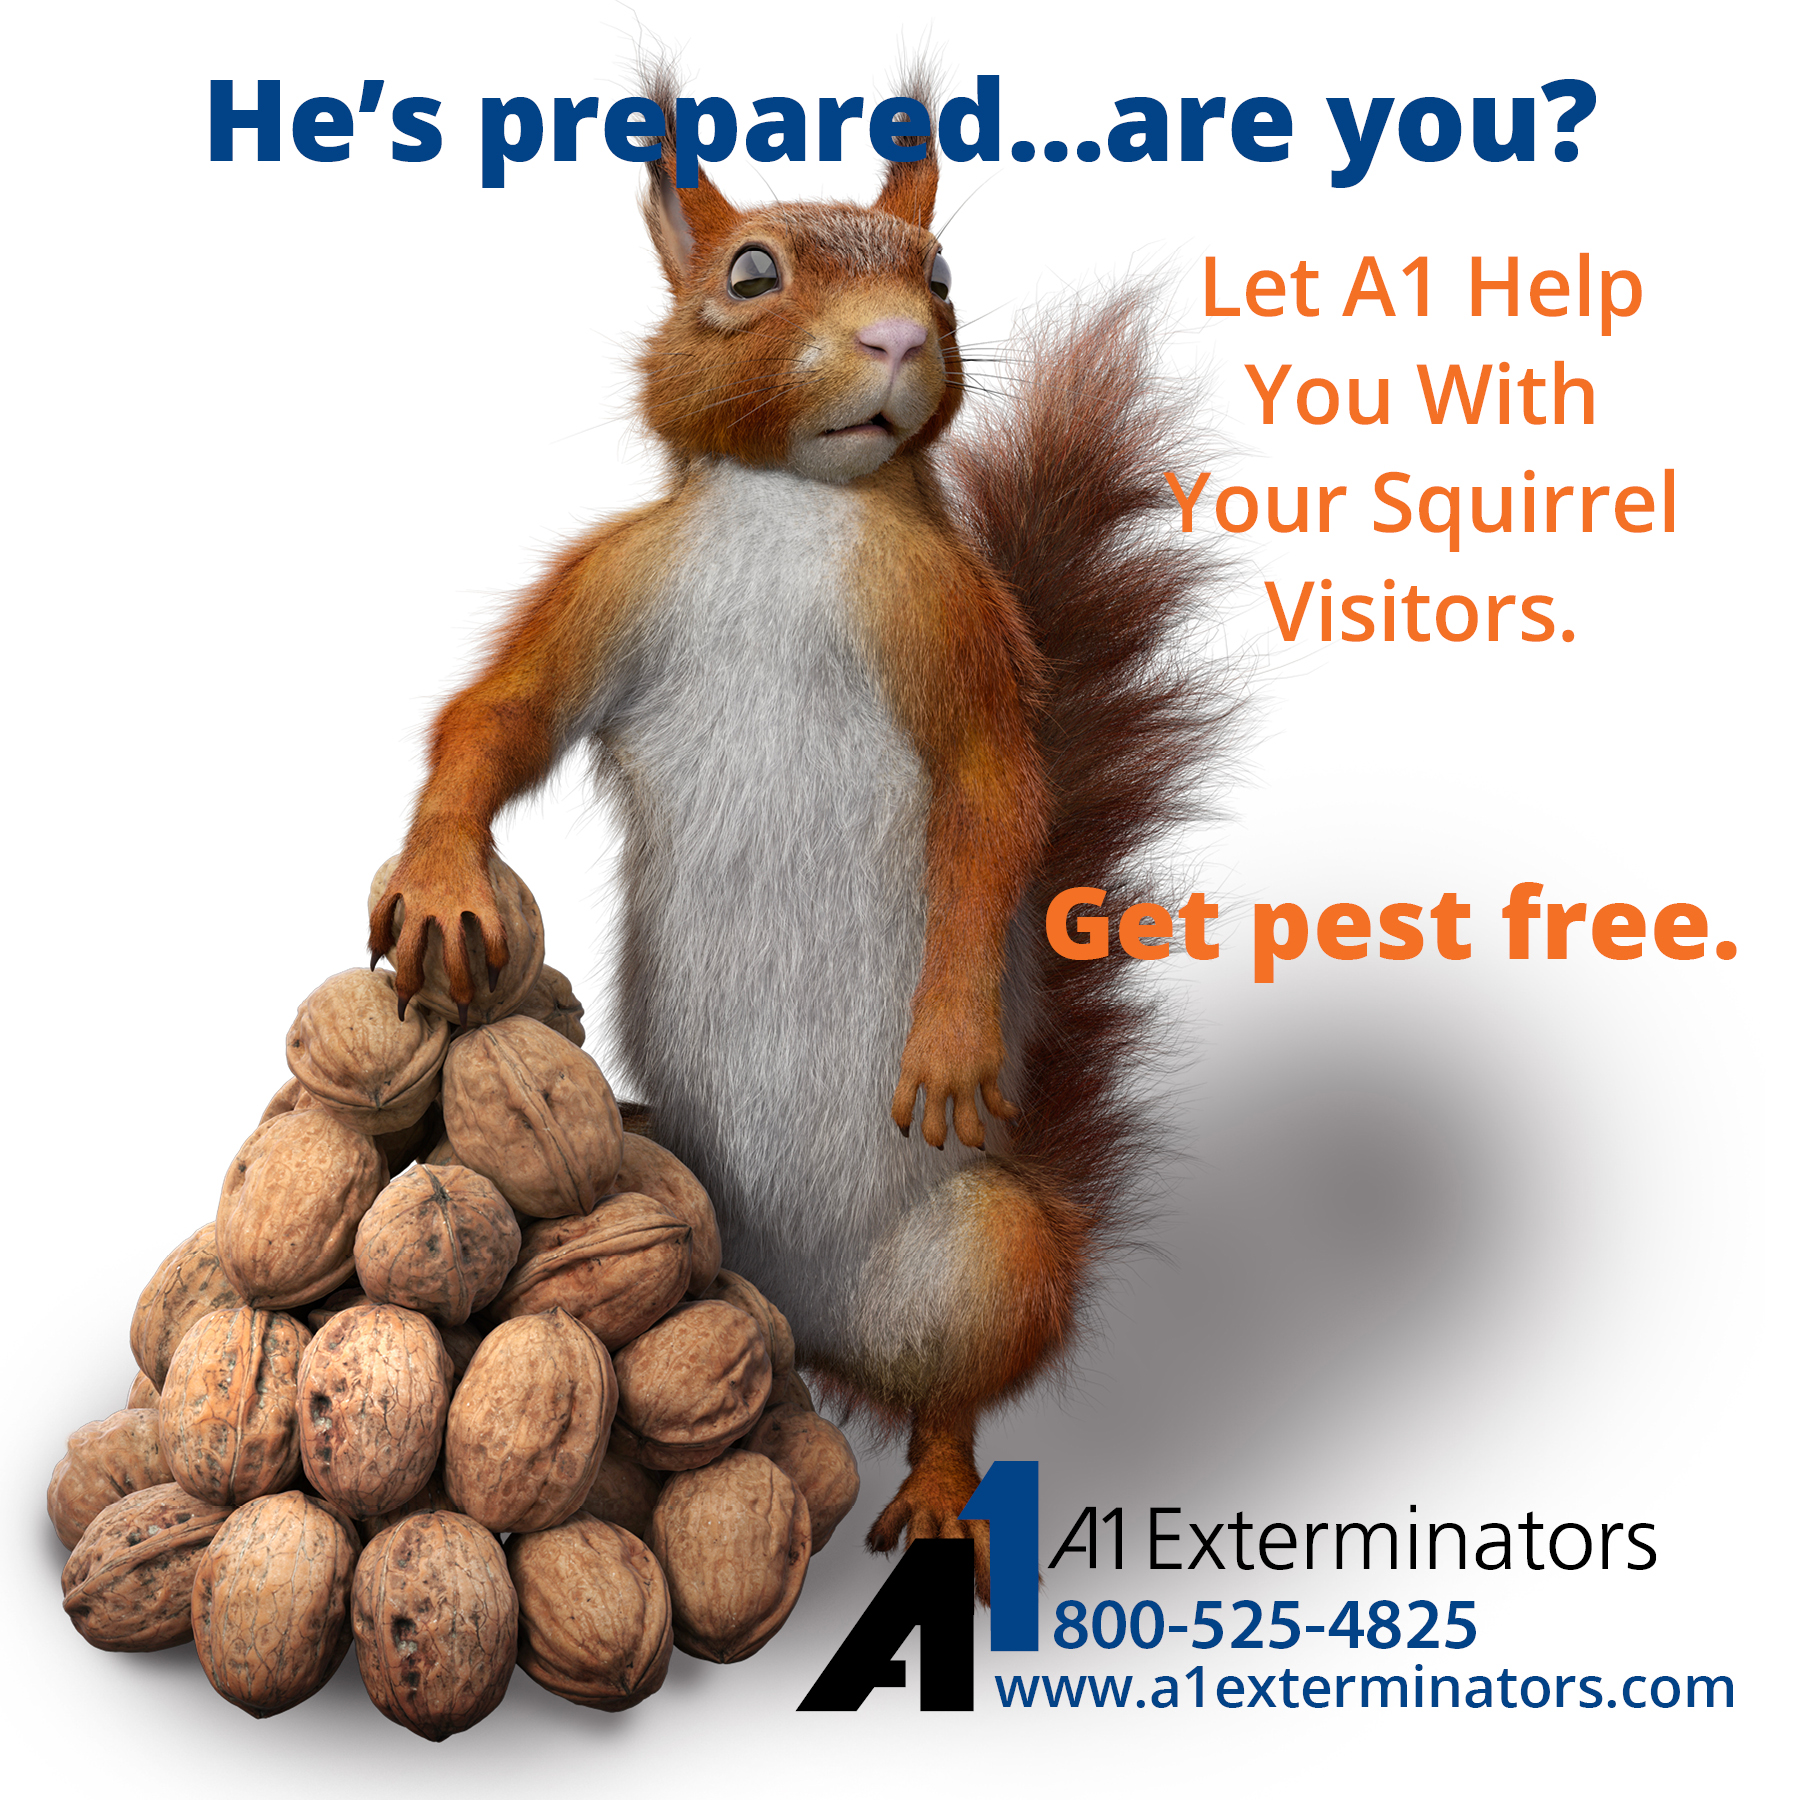 CGI-rendered squirrel boasting impressive stash of acorns. "He's prepared... are you? Let A1 help you with your squirrel visitors." [A1 Logo]